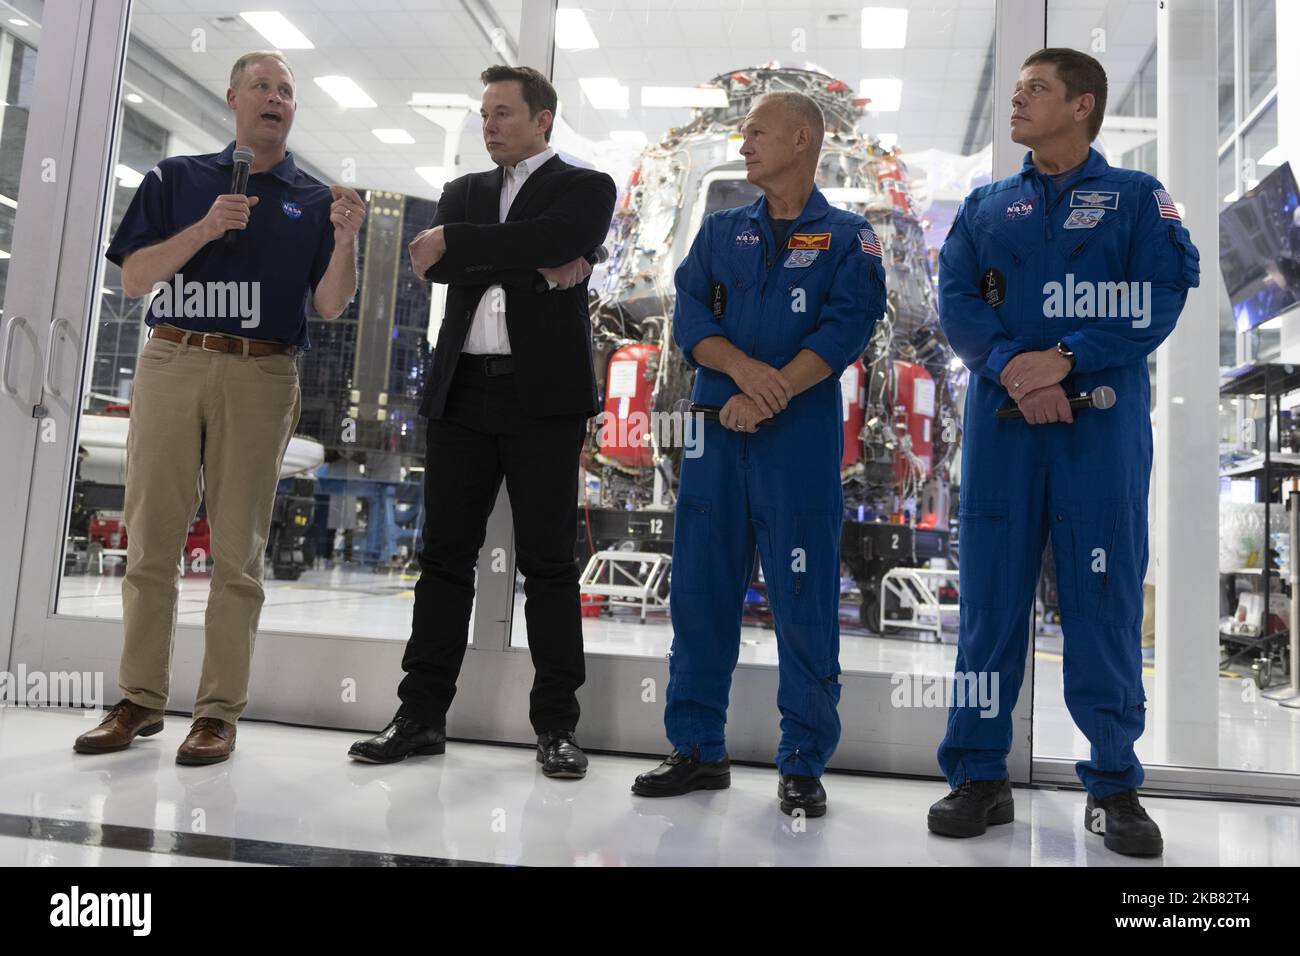 NASA administrator Jim Bridenstine, NASA astronauts Bob Behnken, Doug Hurley and SpaceX Chief Engineer Elon Musk speak to media in front of Crew Dragon cleanroom at SpaceX Headquarters in Hawthorne, California on October 10, 2019. (Photo by Yichuan Cao/NurPhoto) Stock Photo